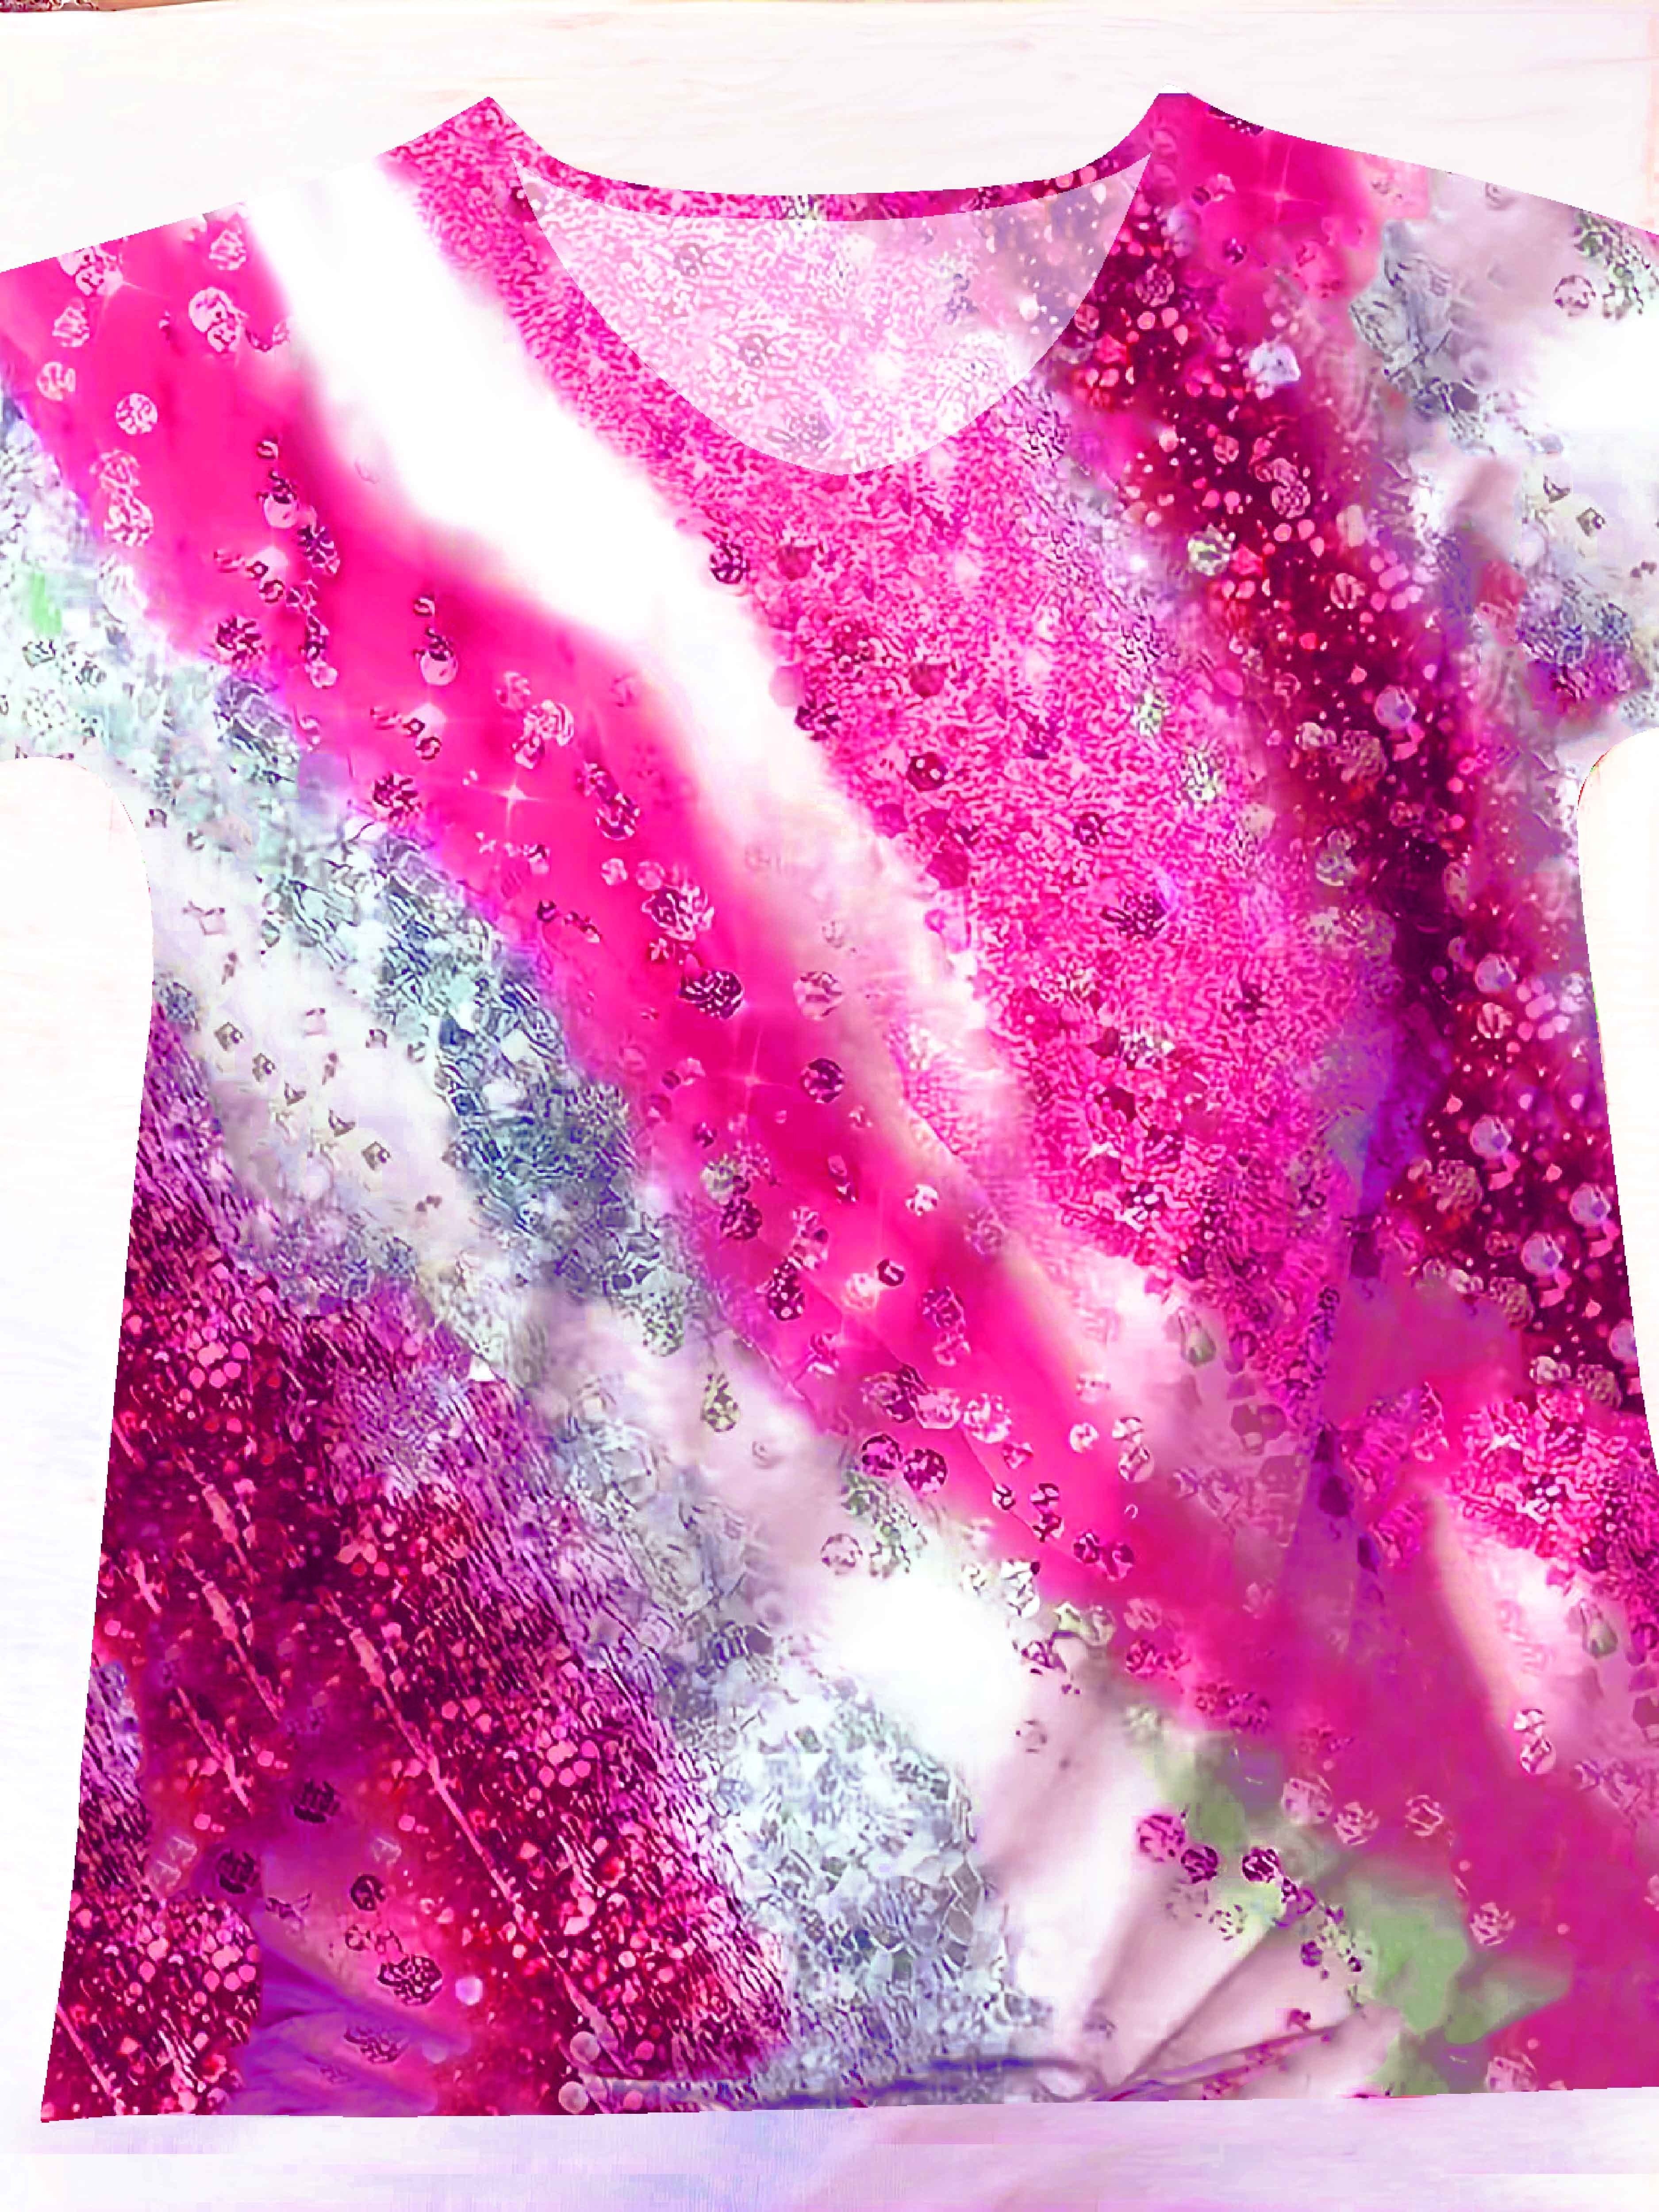 Pink Sparkly T